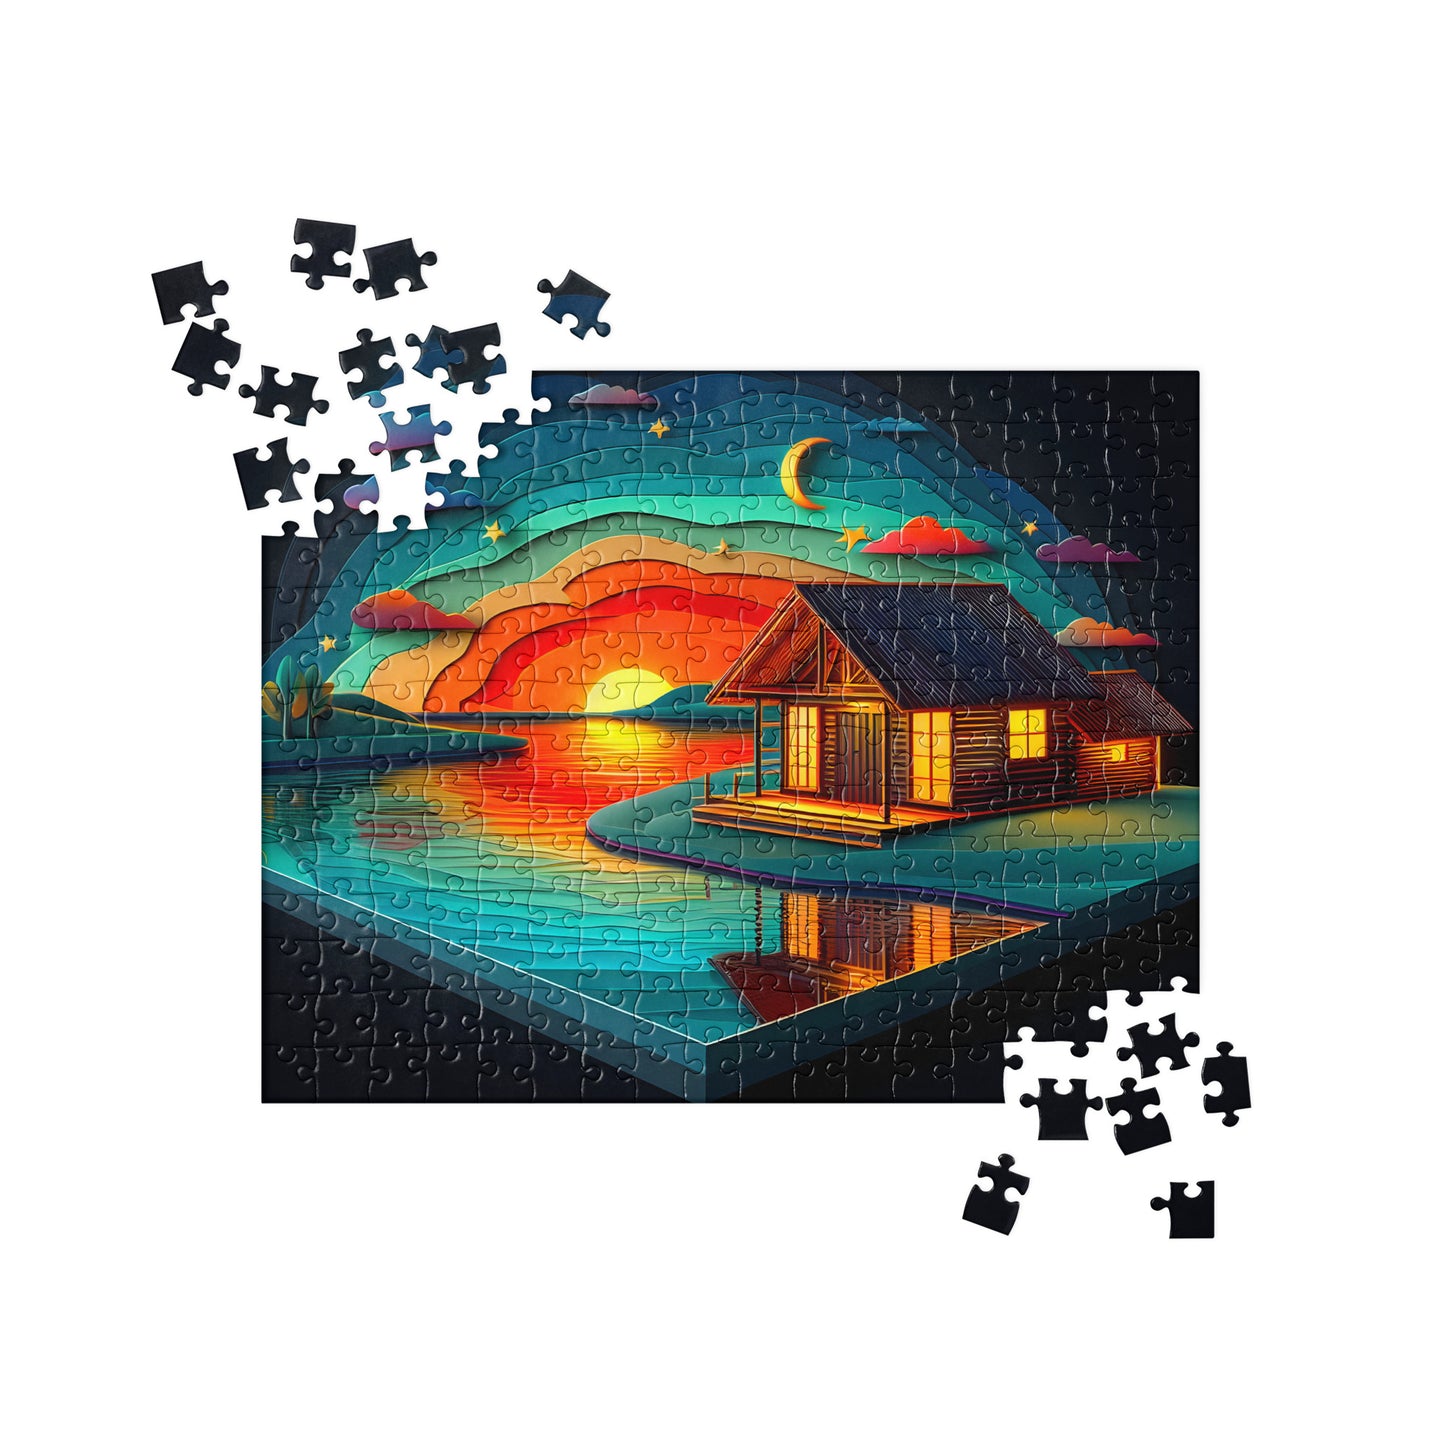 3D Wooden Cabin - Jigsaw Puzzle #9